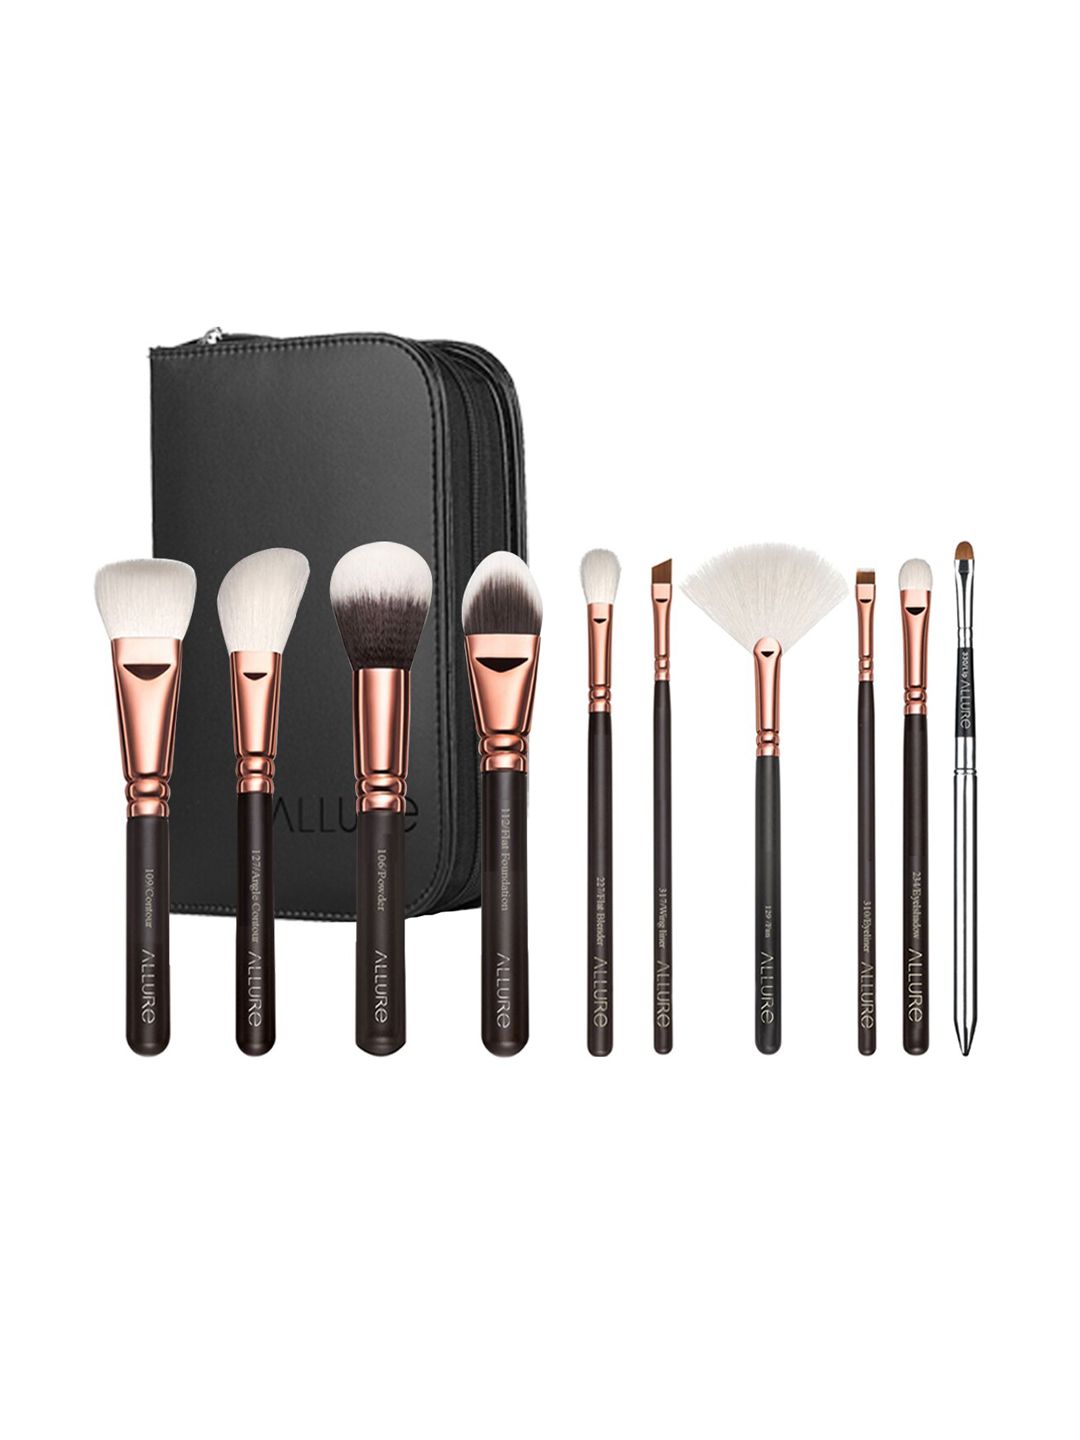 ALLURE Rose Gold  Black Set of 10 Makeup Brushes - Top10 Price in India